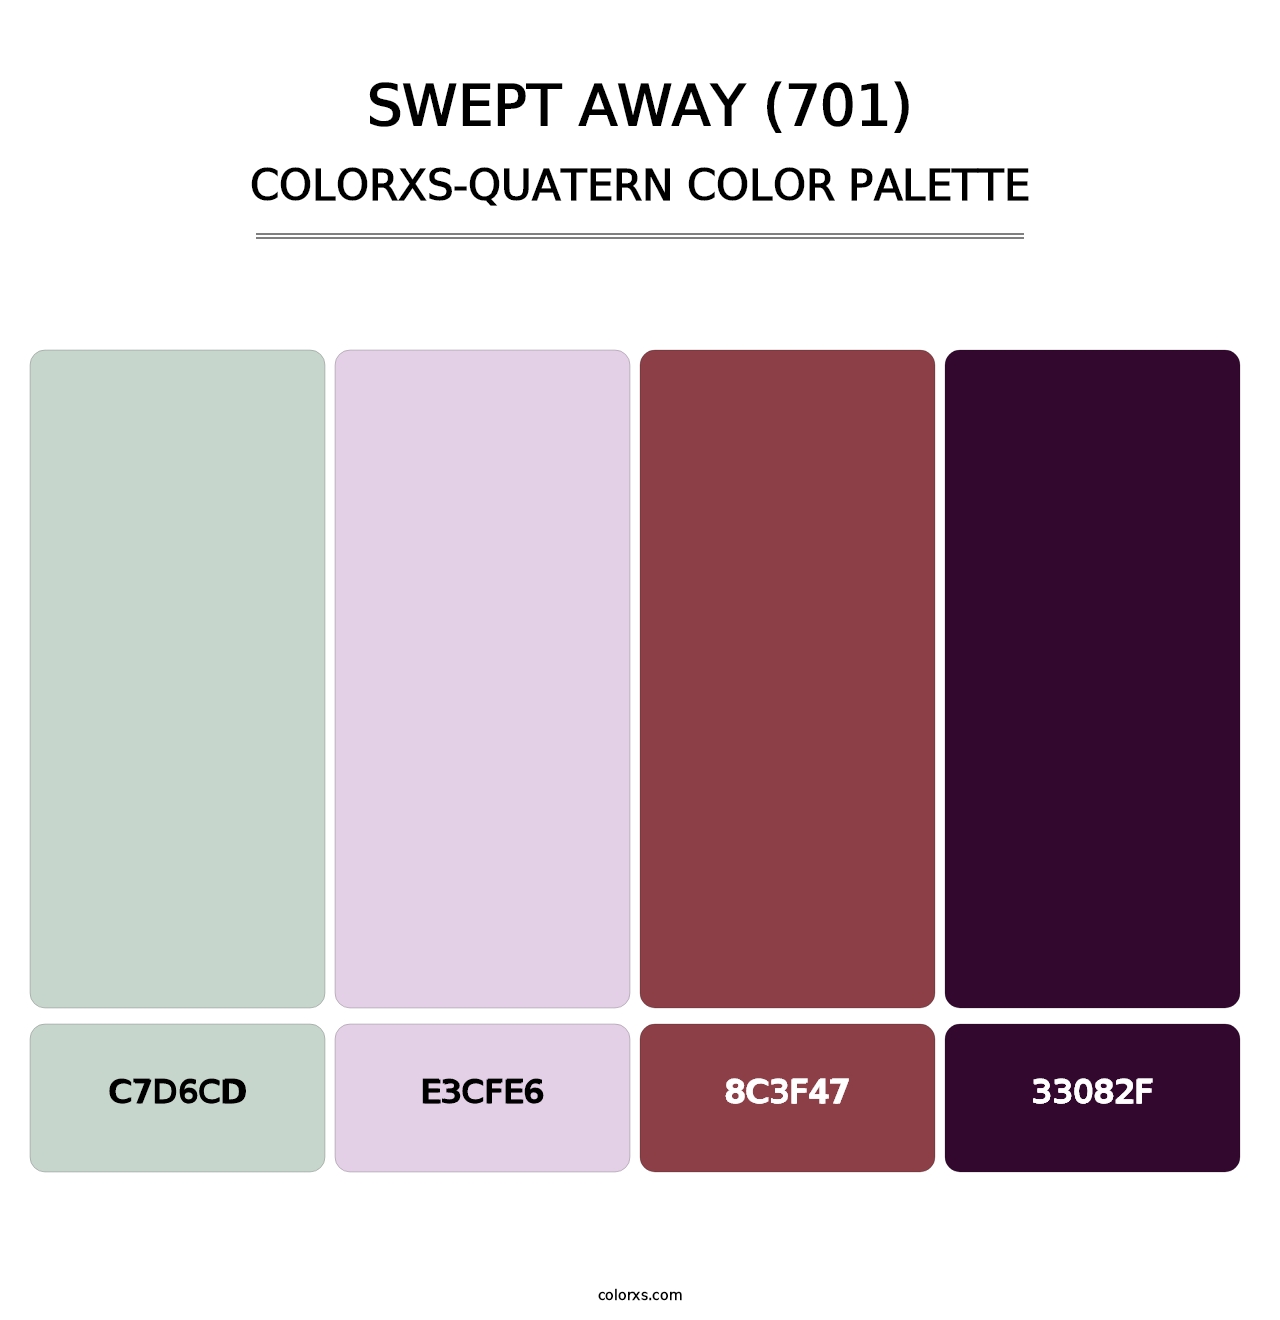 Swept Away (701) - Colorxs Quatern Palette